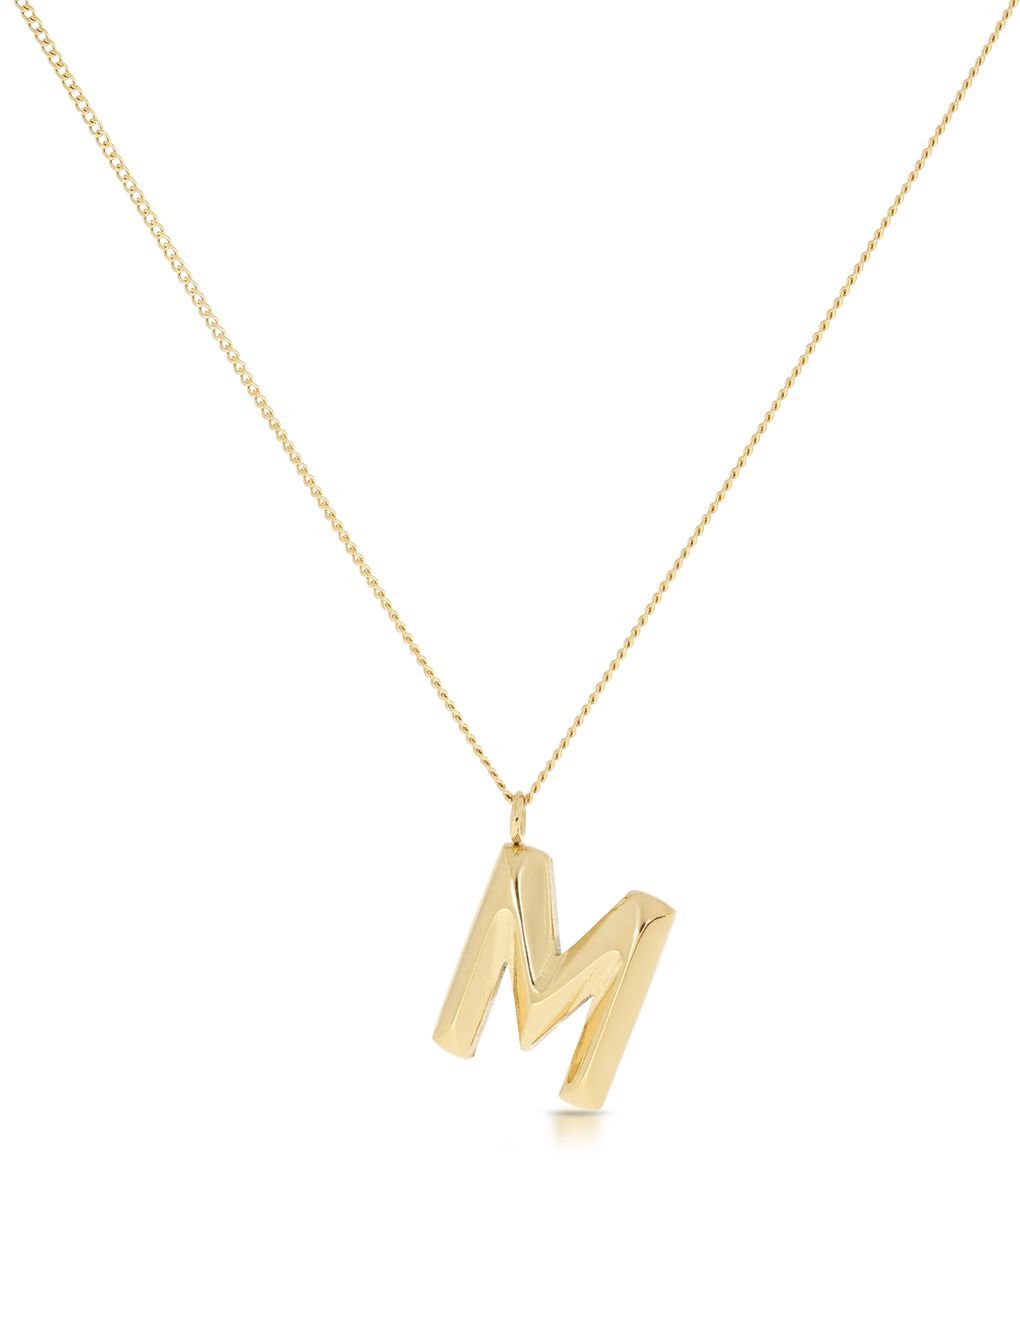 1699973378 hey harper initial necklace